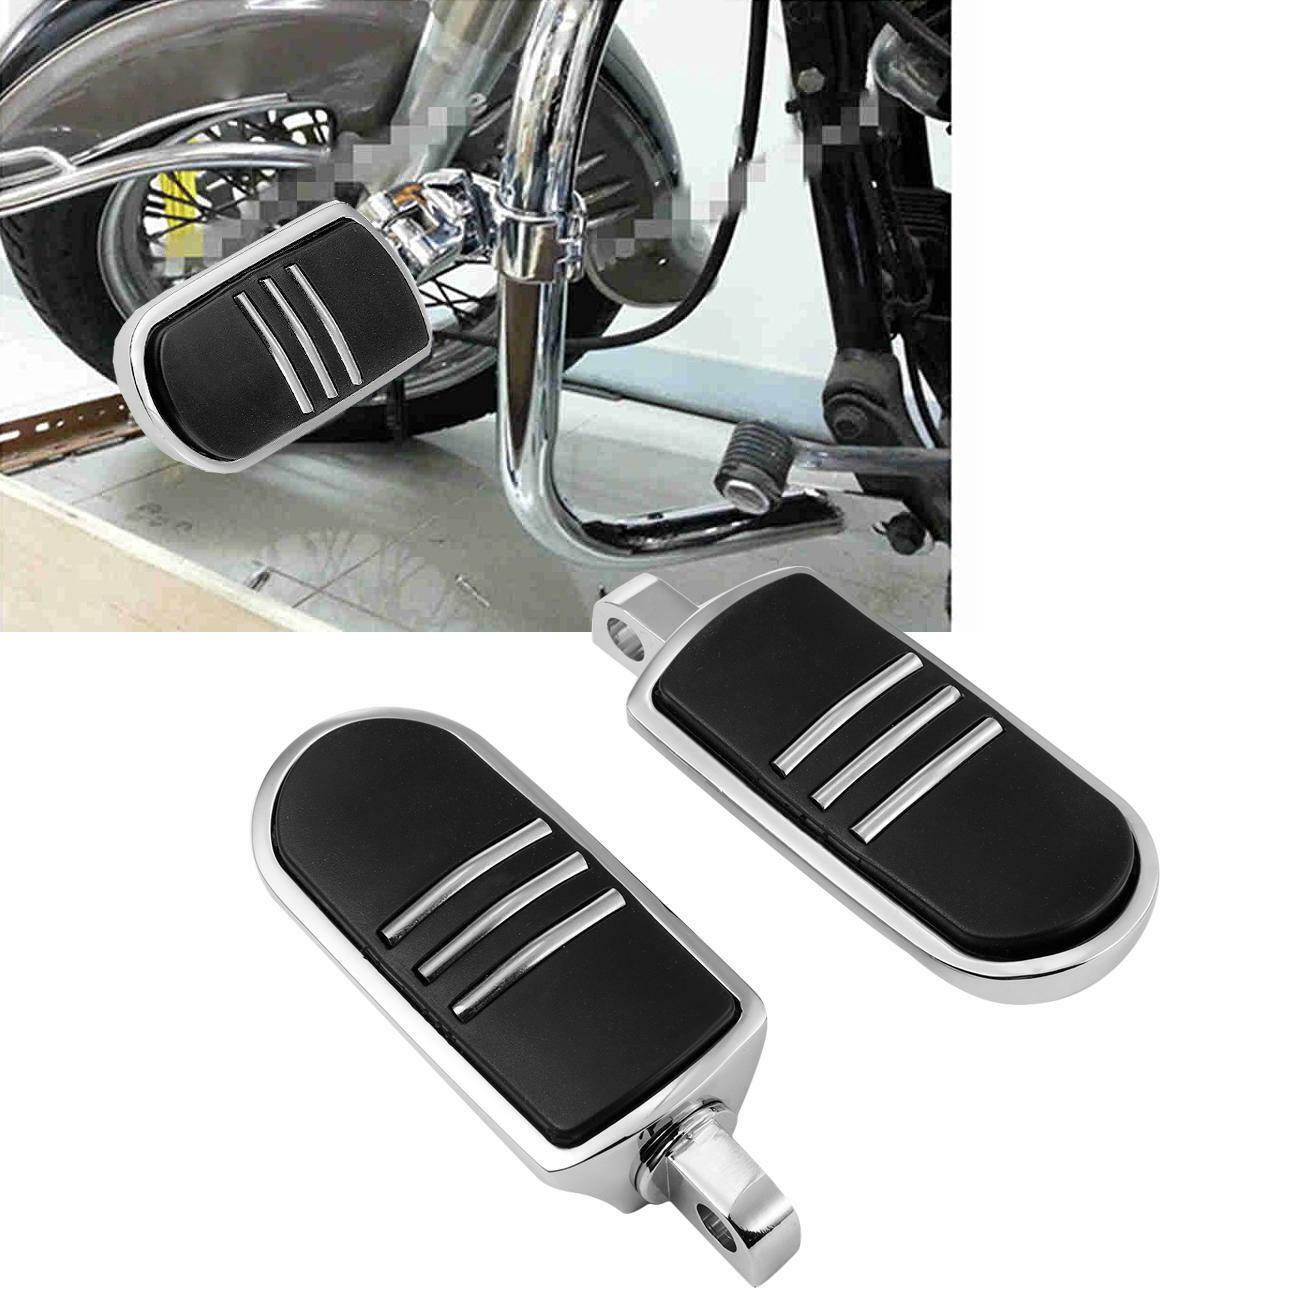 Streamliner Highway Foot Pegs Footrest For Harley Touring Road King Street Glide